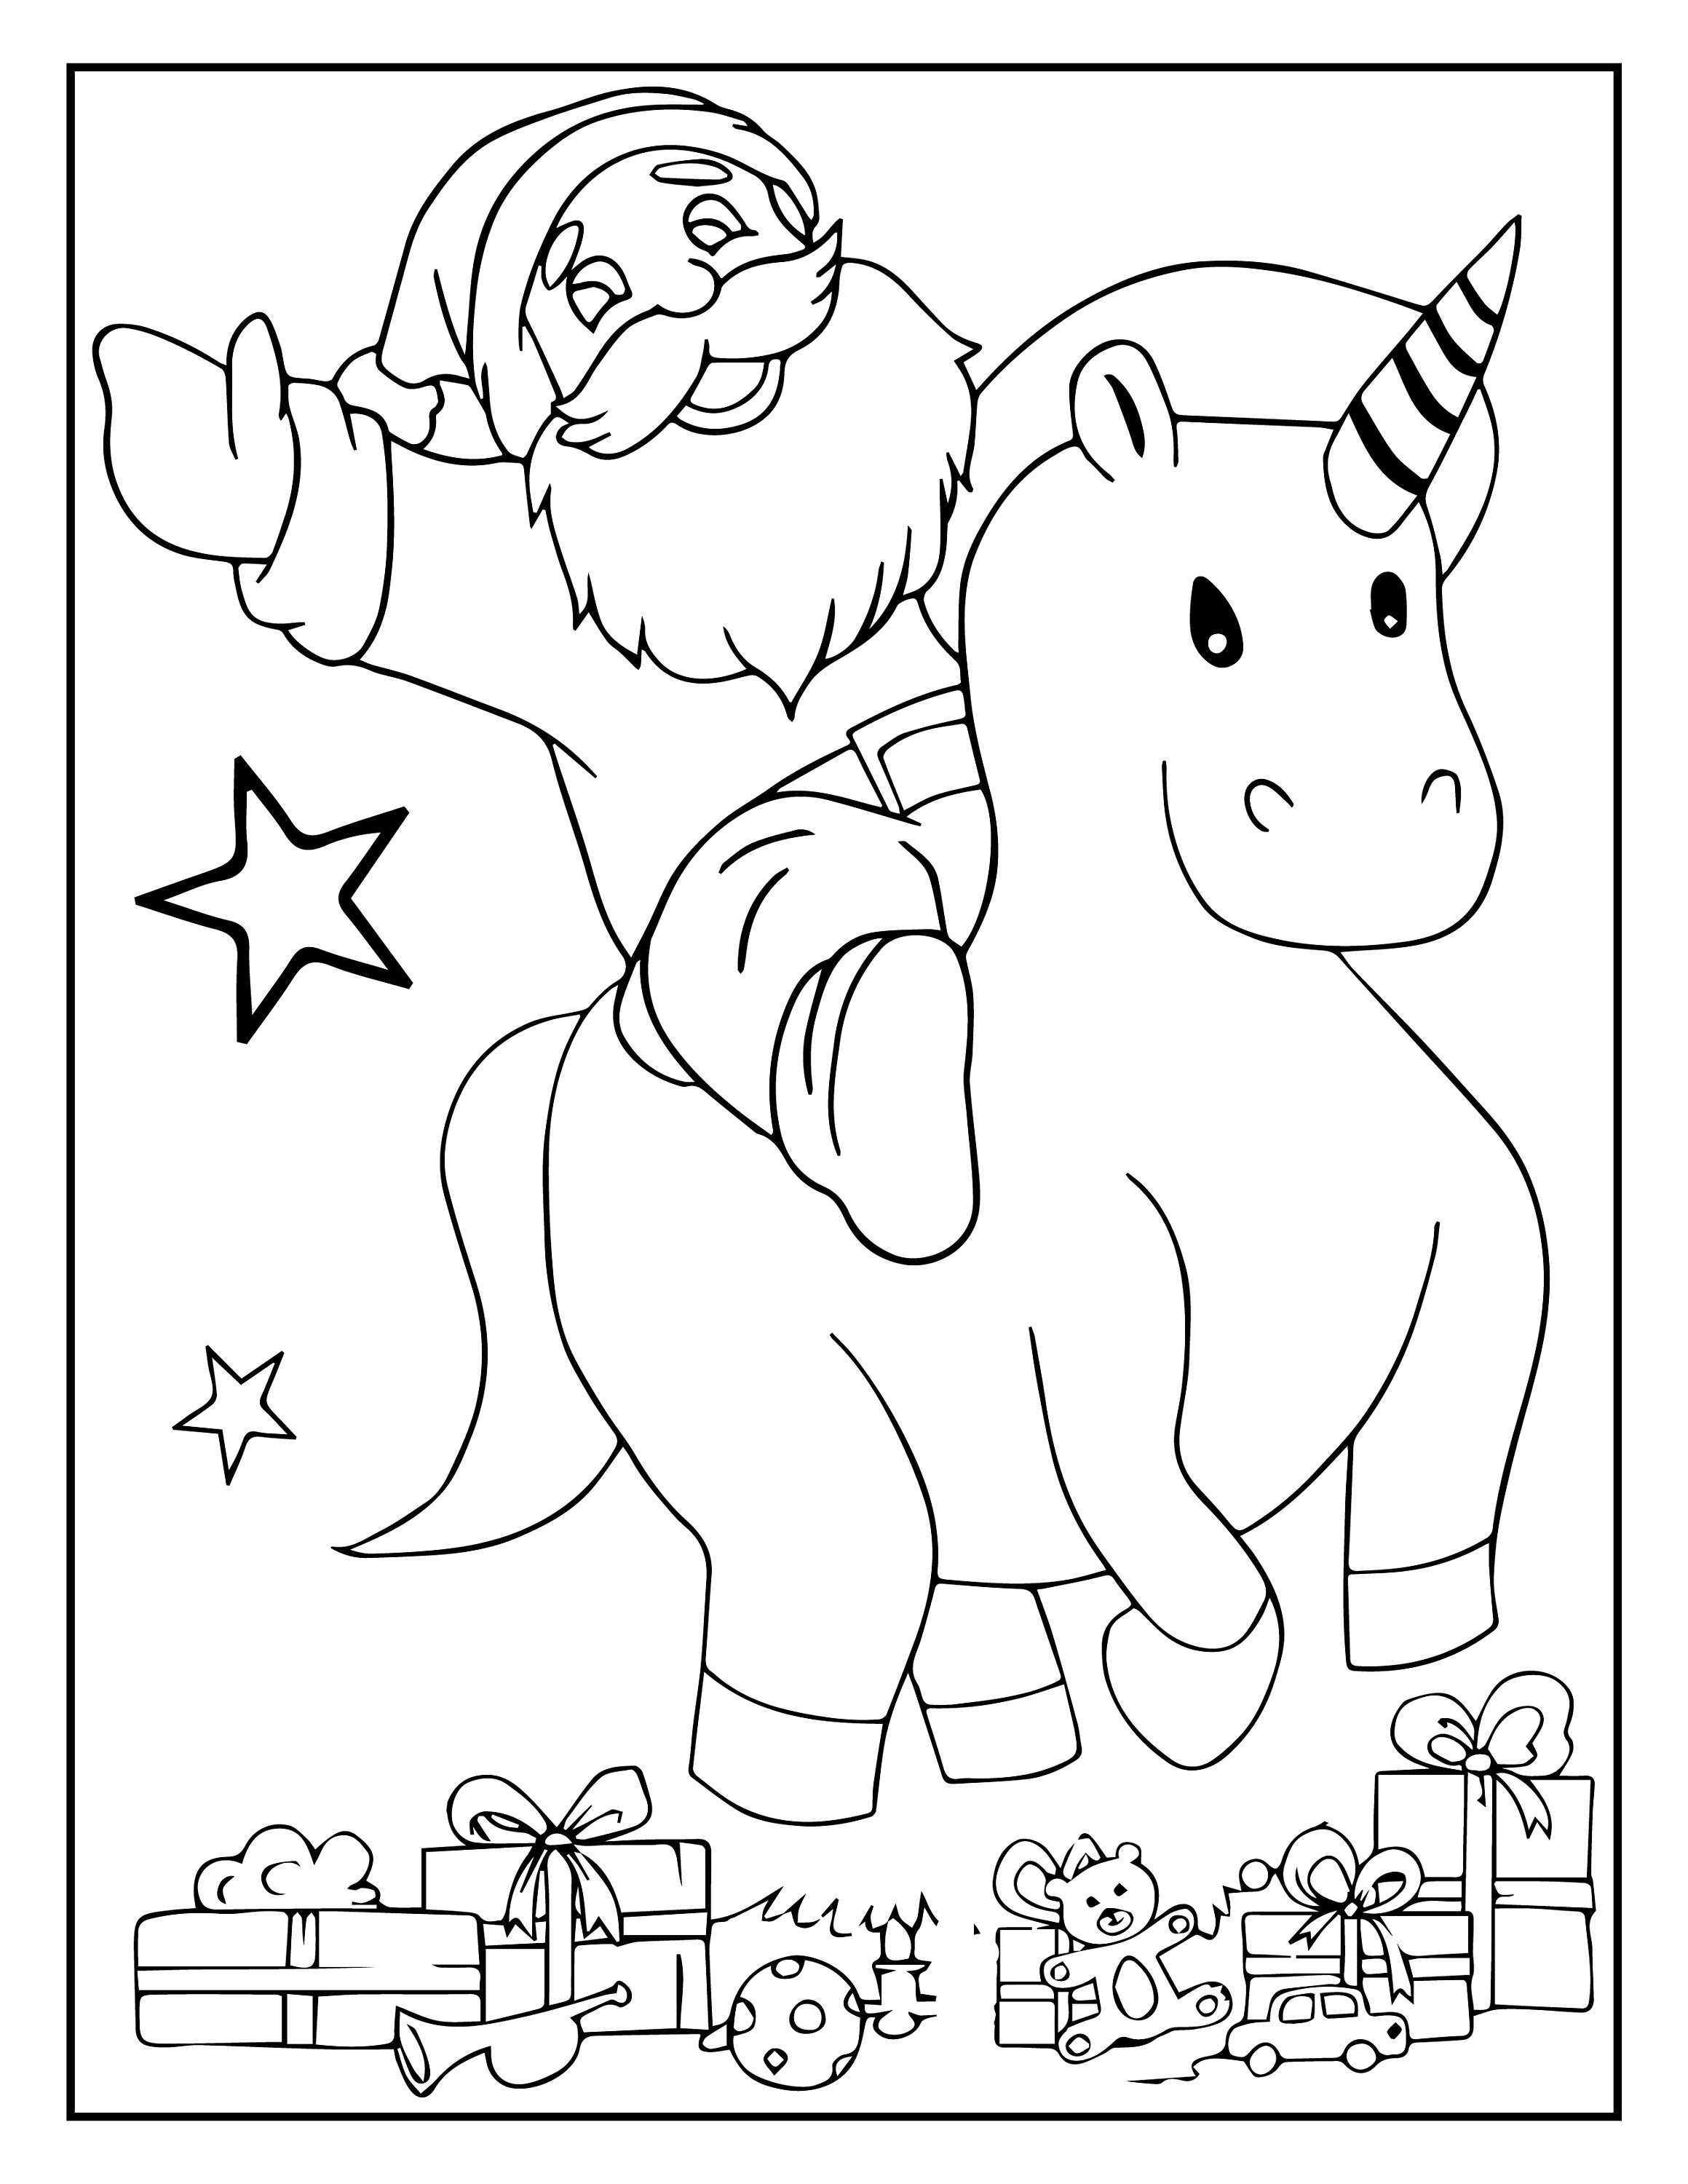 Coloring book pages. Digital and Printable Coloring Book Pages | Etsy